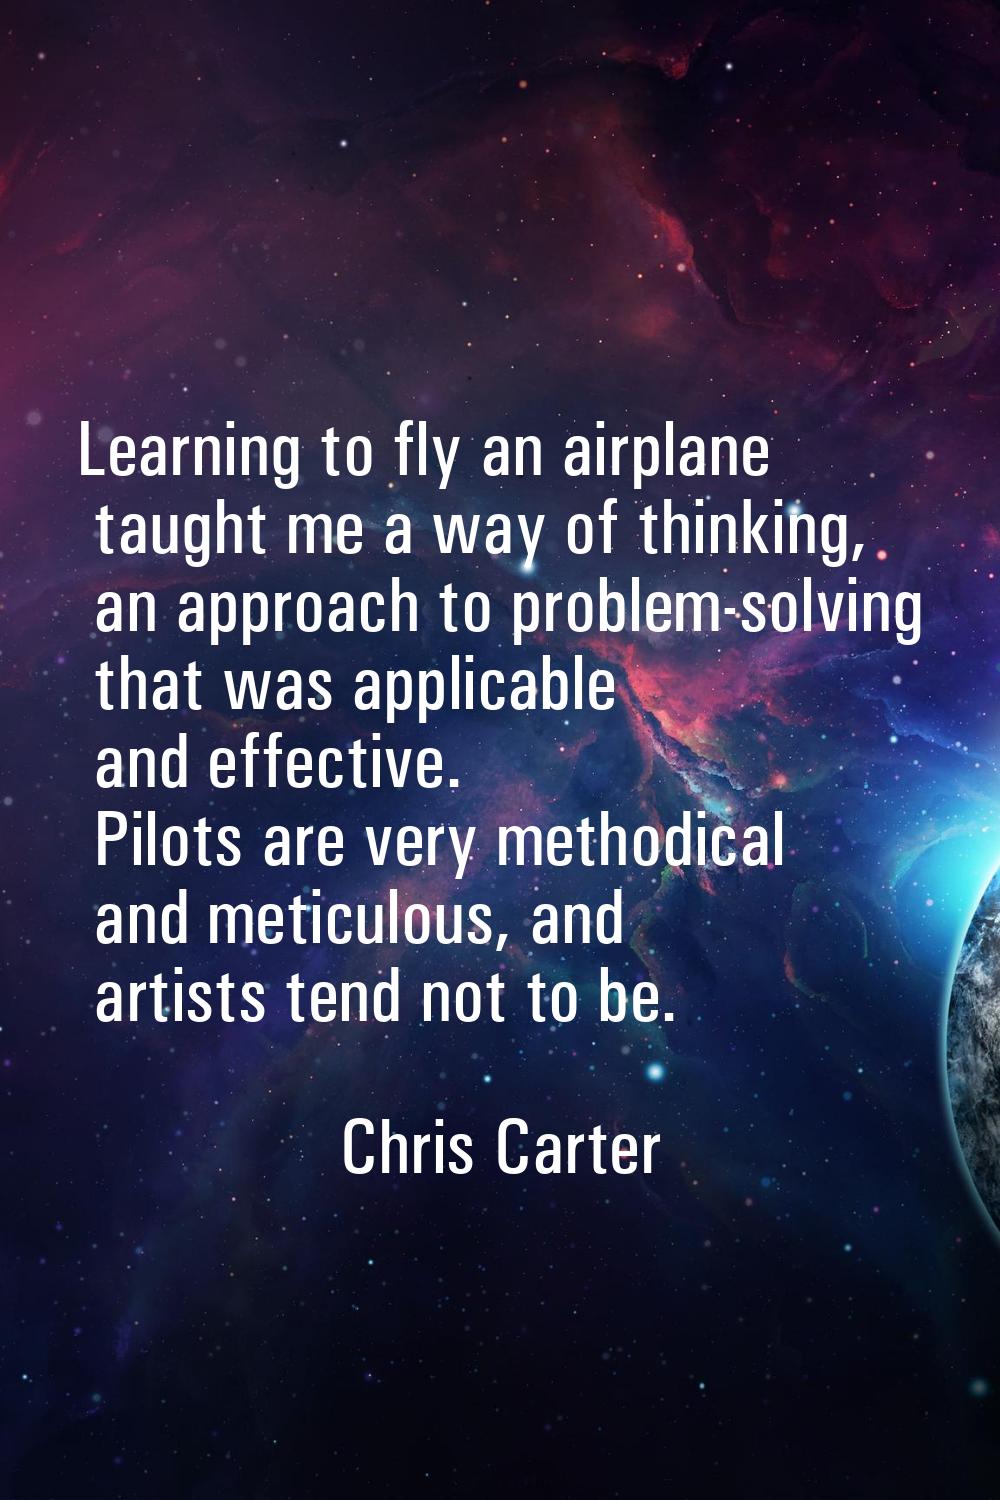 Learning to fly an airplane taught me a way of thinking, an approach to problem-solving that was ap